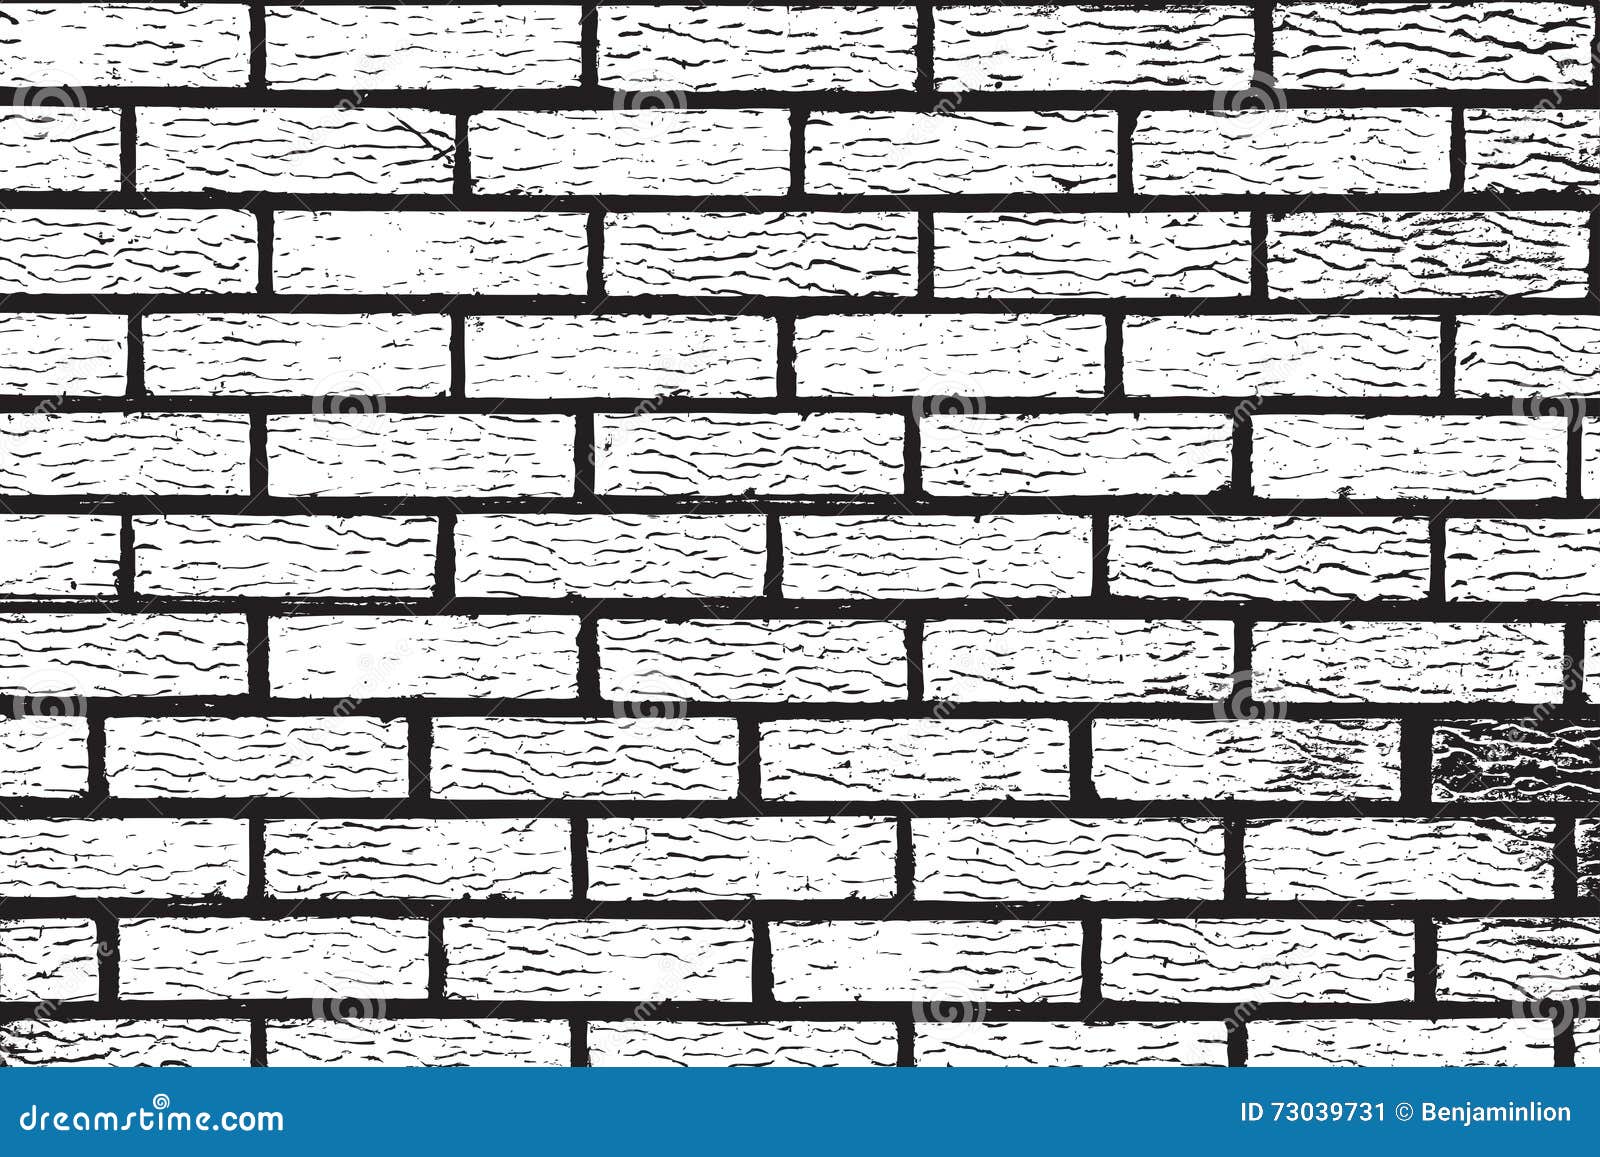 Grunge black texture as brick wall shape on white Vector Image